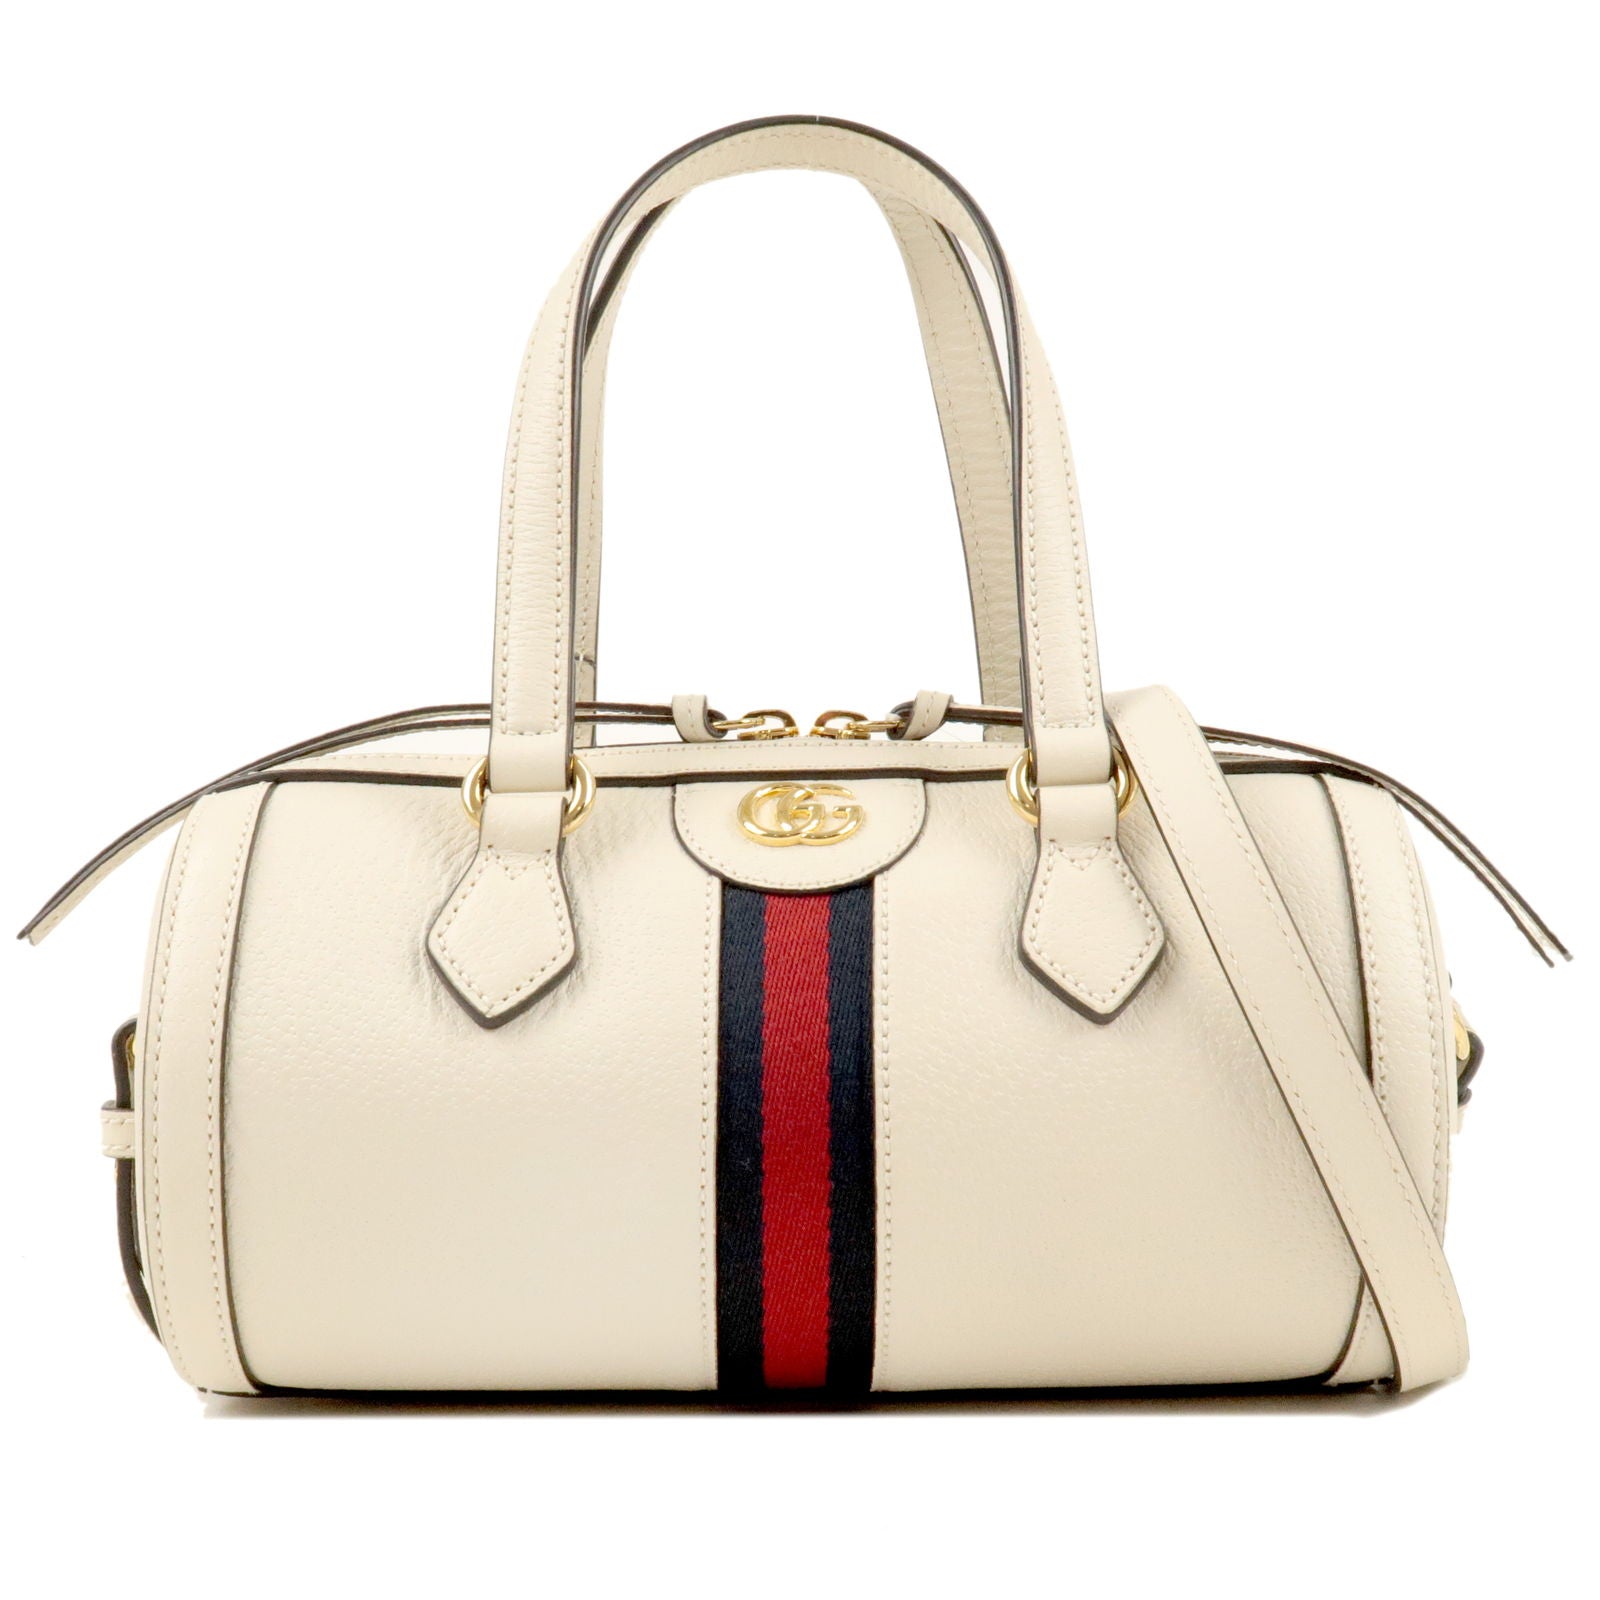 Gucci Ophidia Womens Shoulder Bags, White